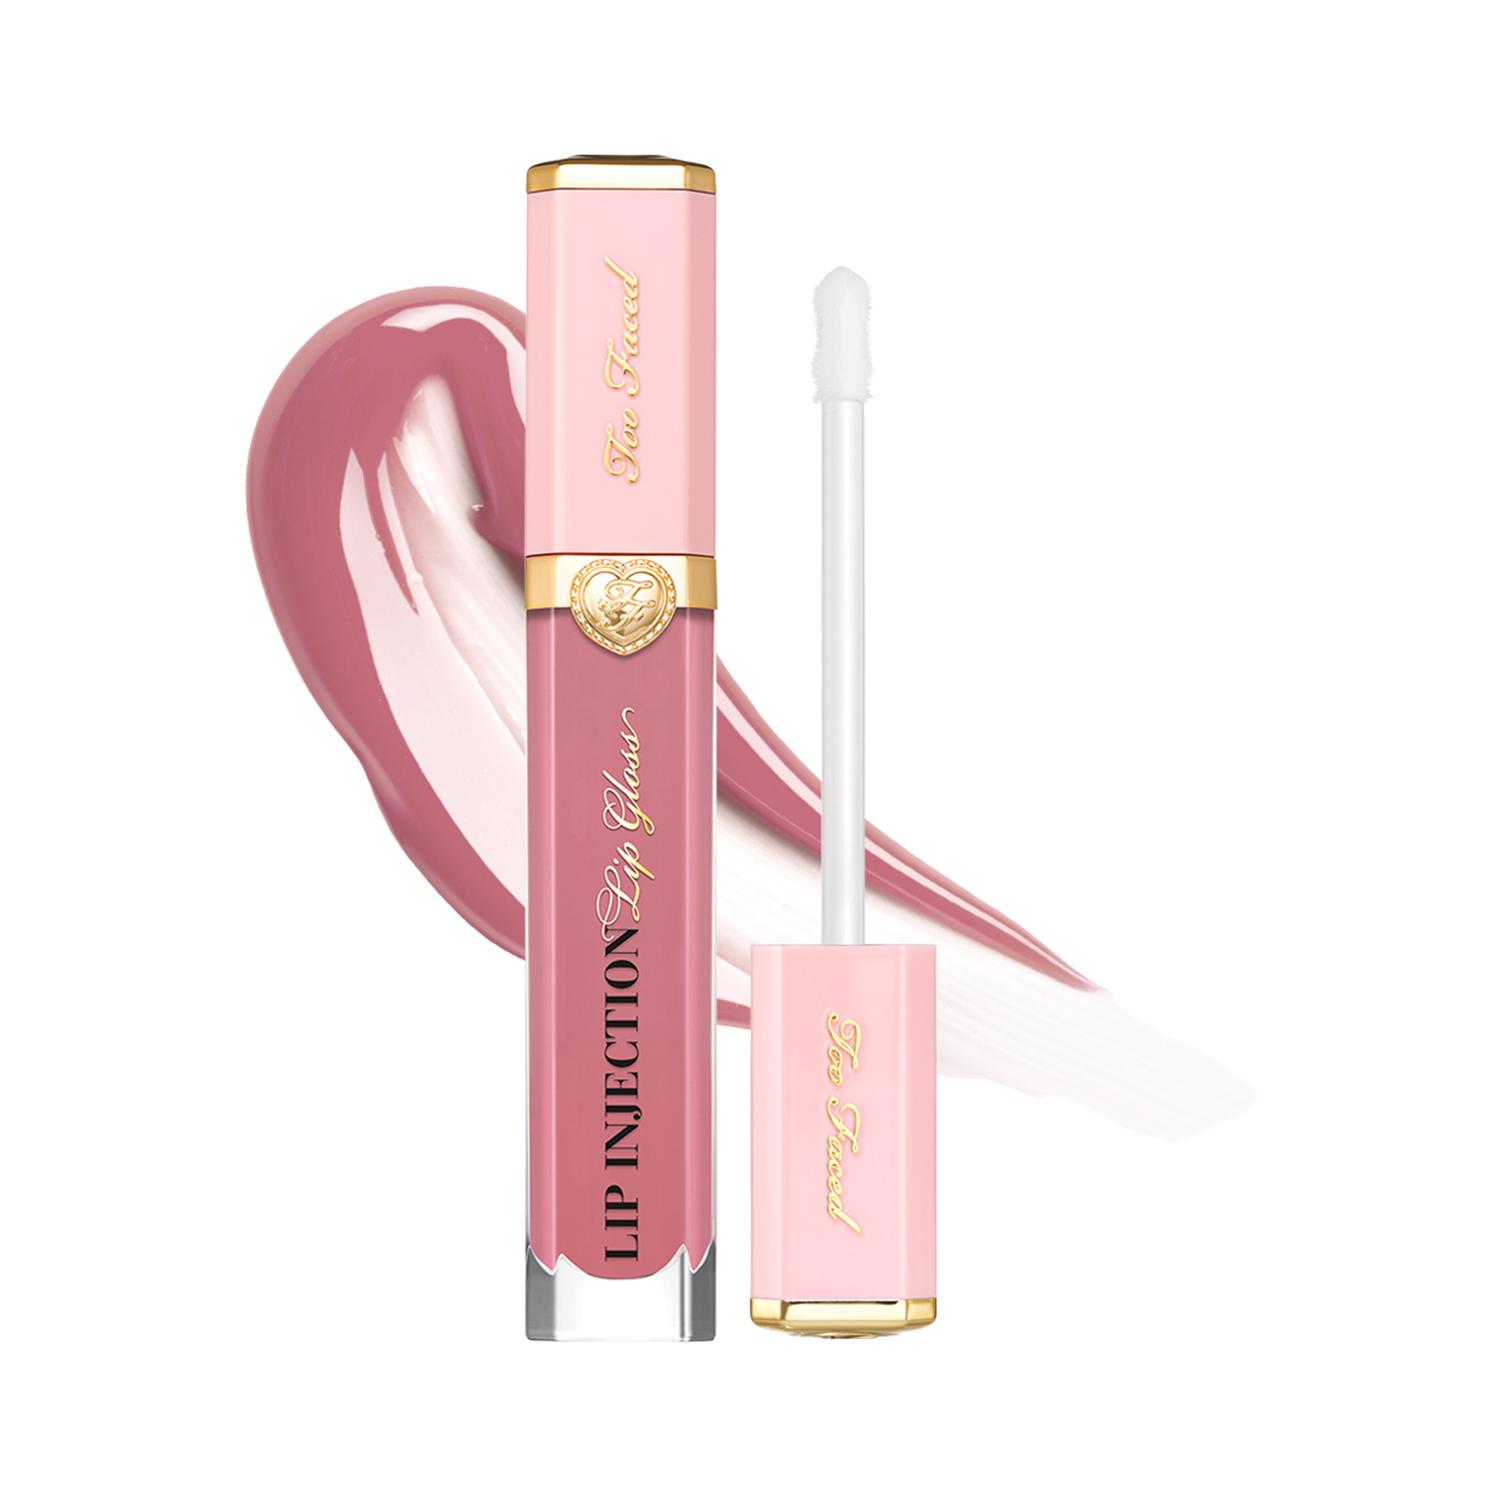 Too Faced | Too Faced Lip Injection Power Plumping Lip Gloss - Glossy & Bossy (7ml)